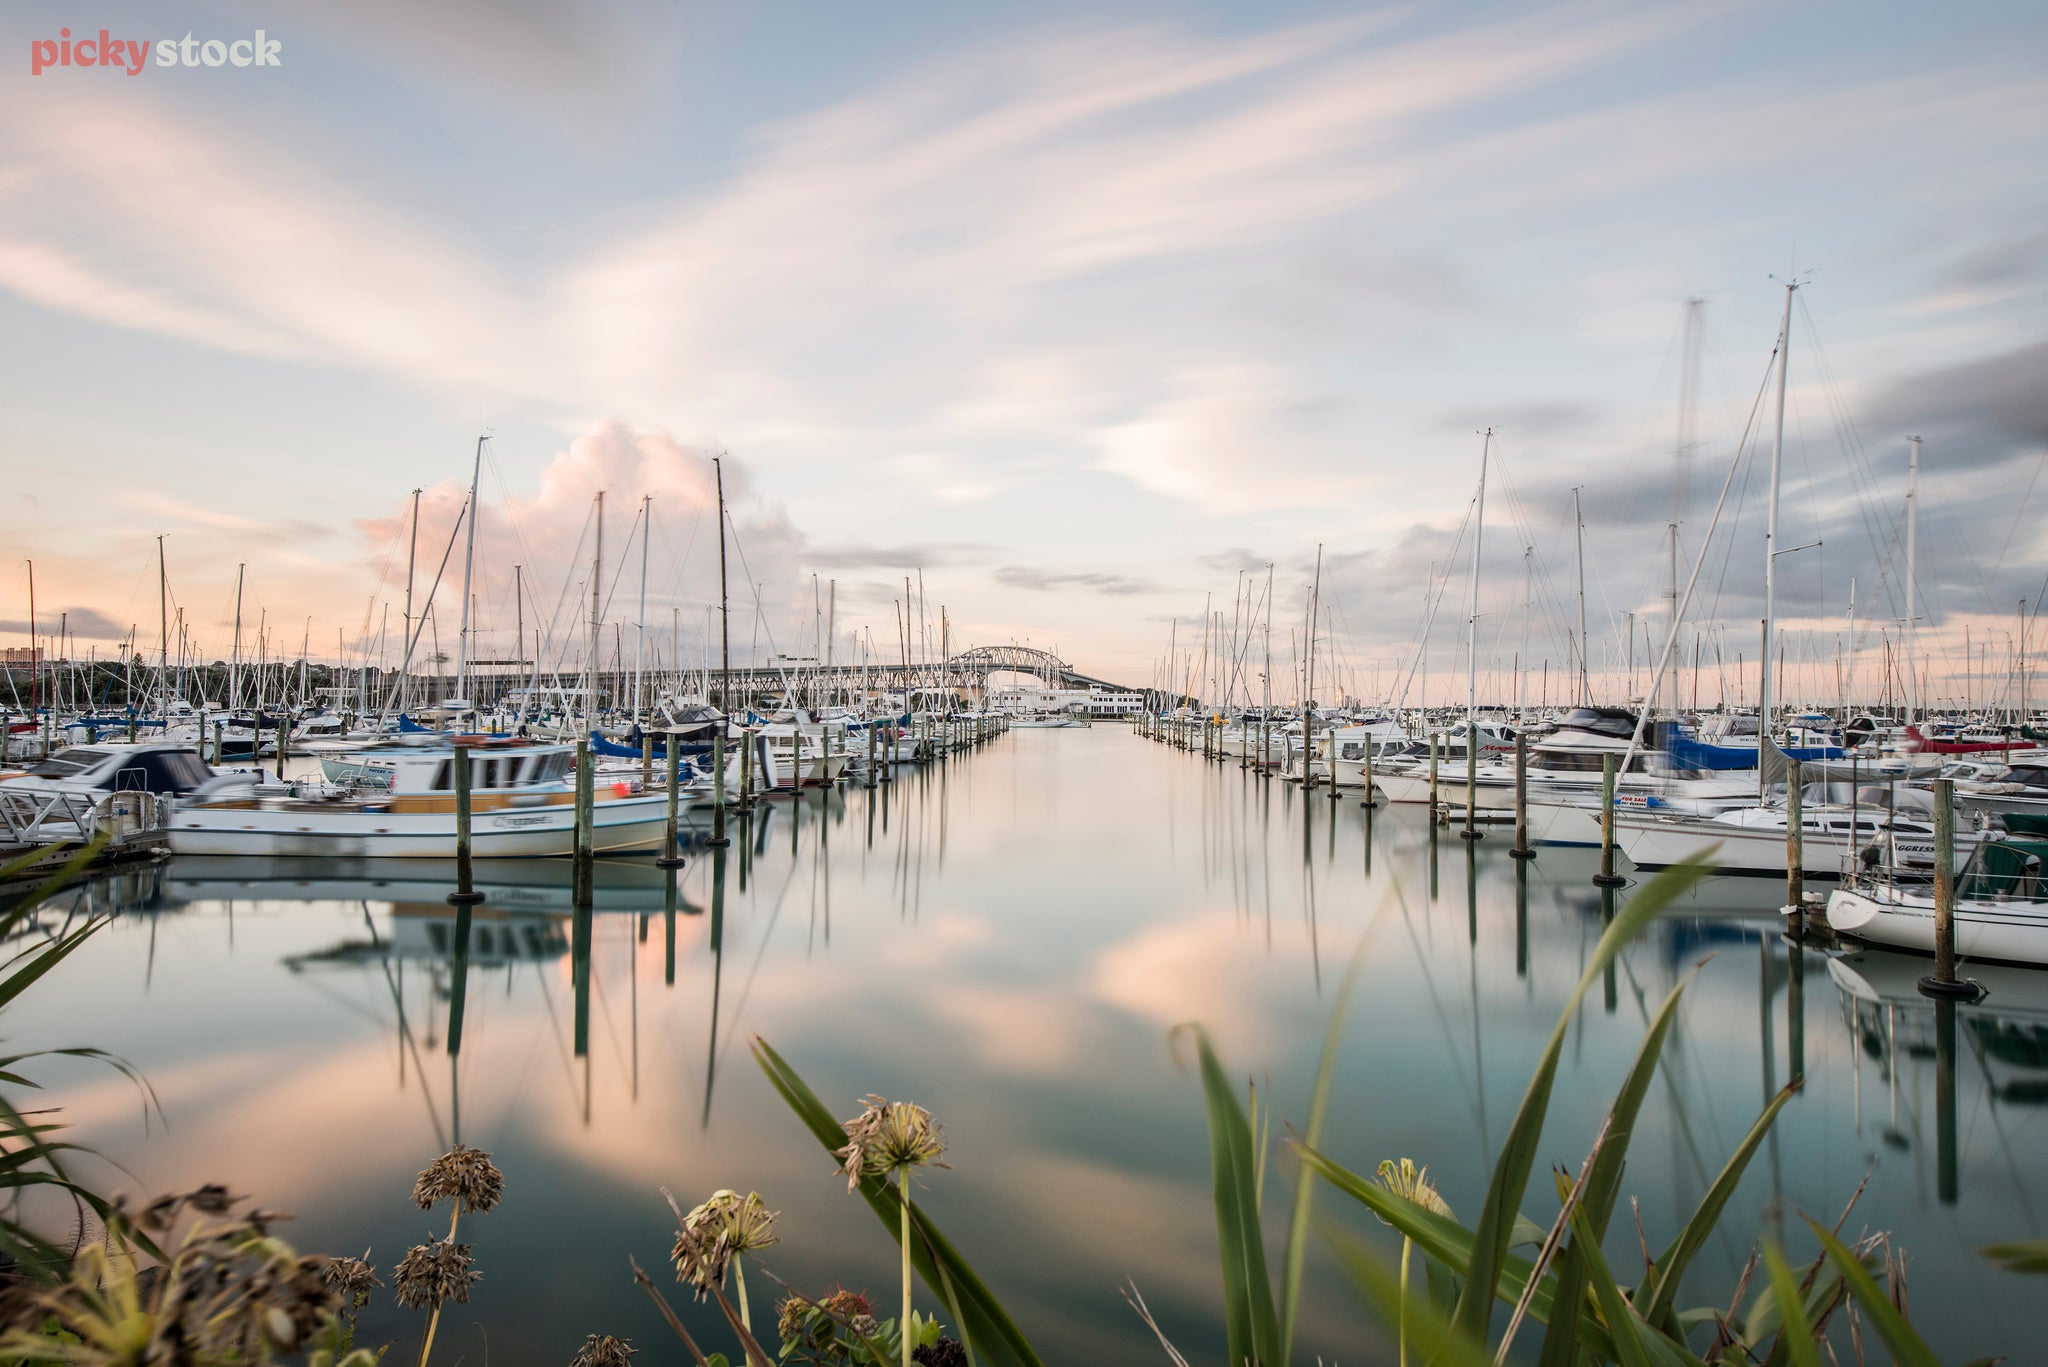 Auckland's heart of boating